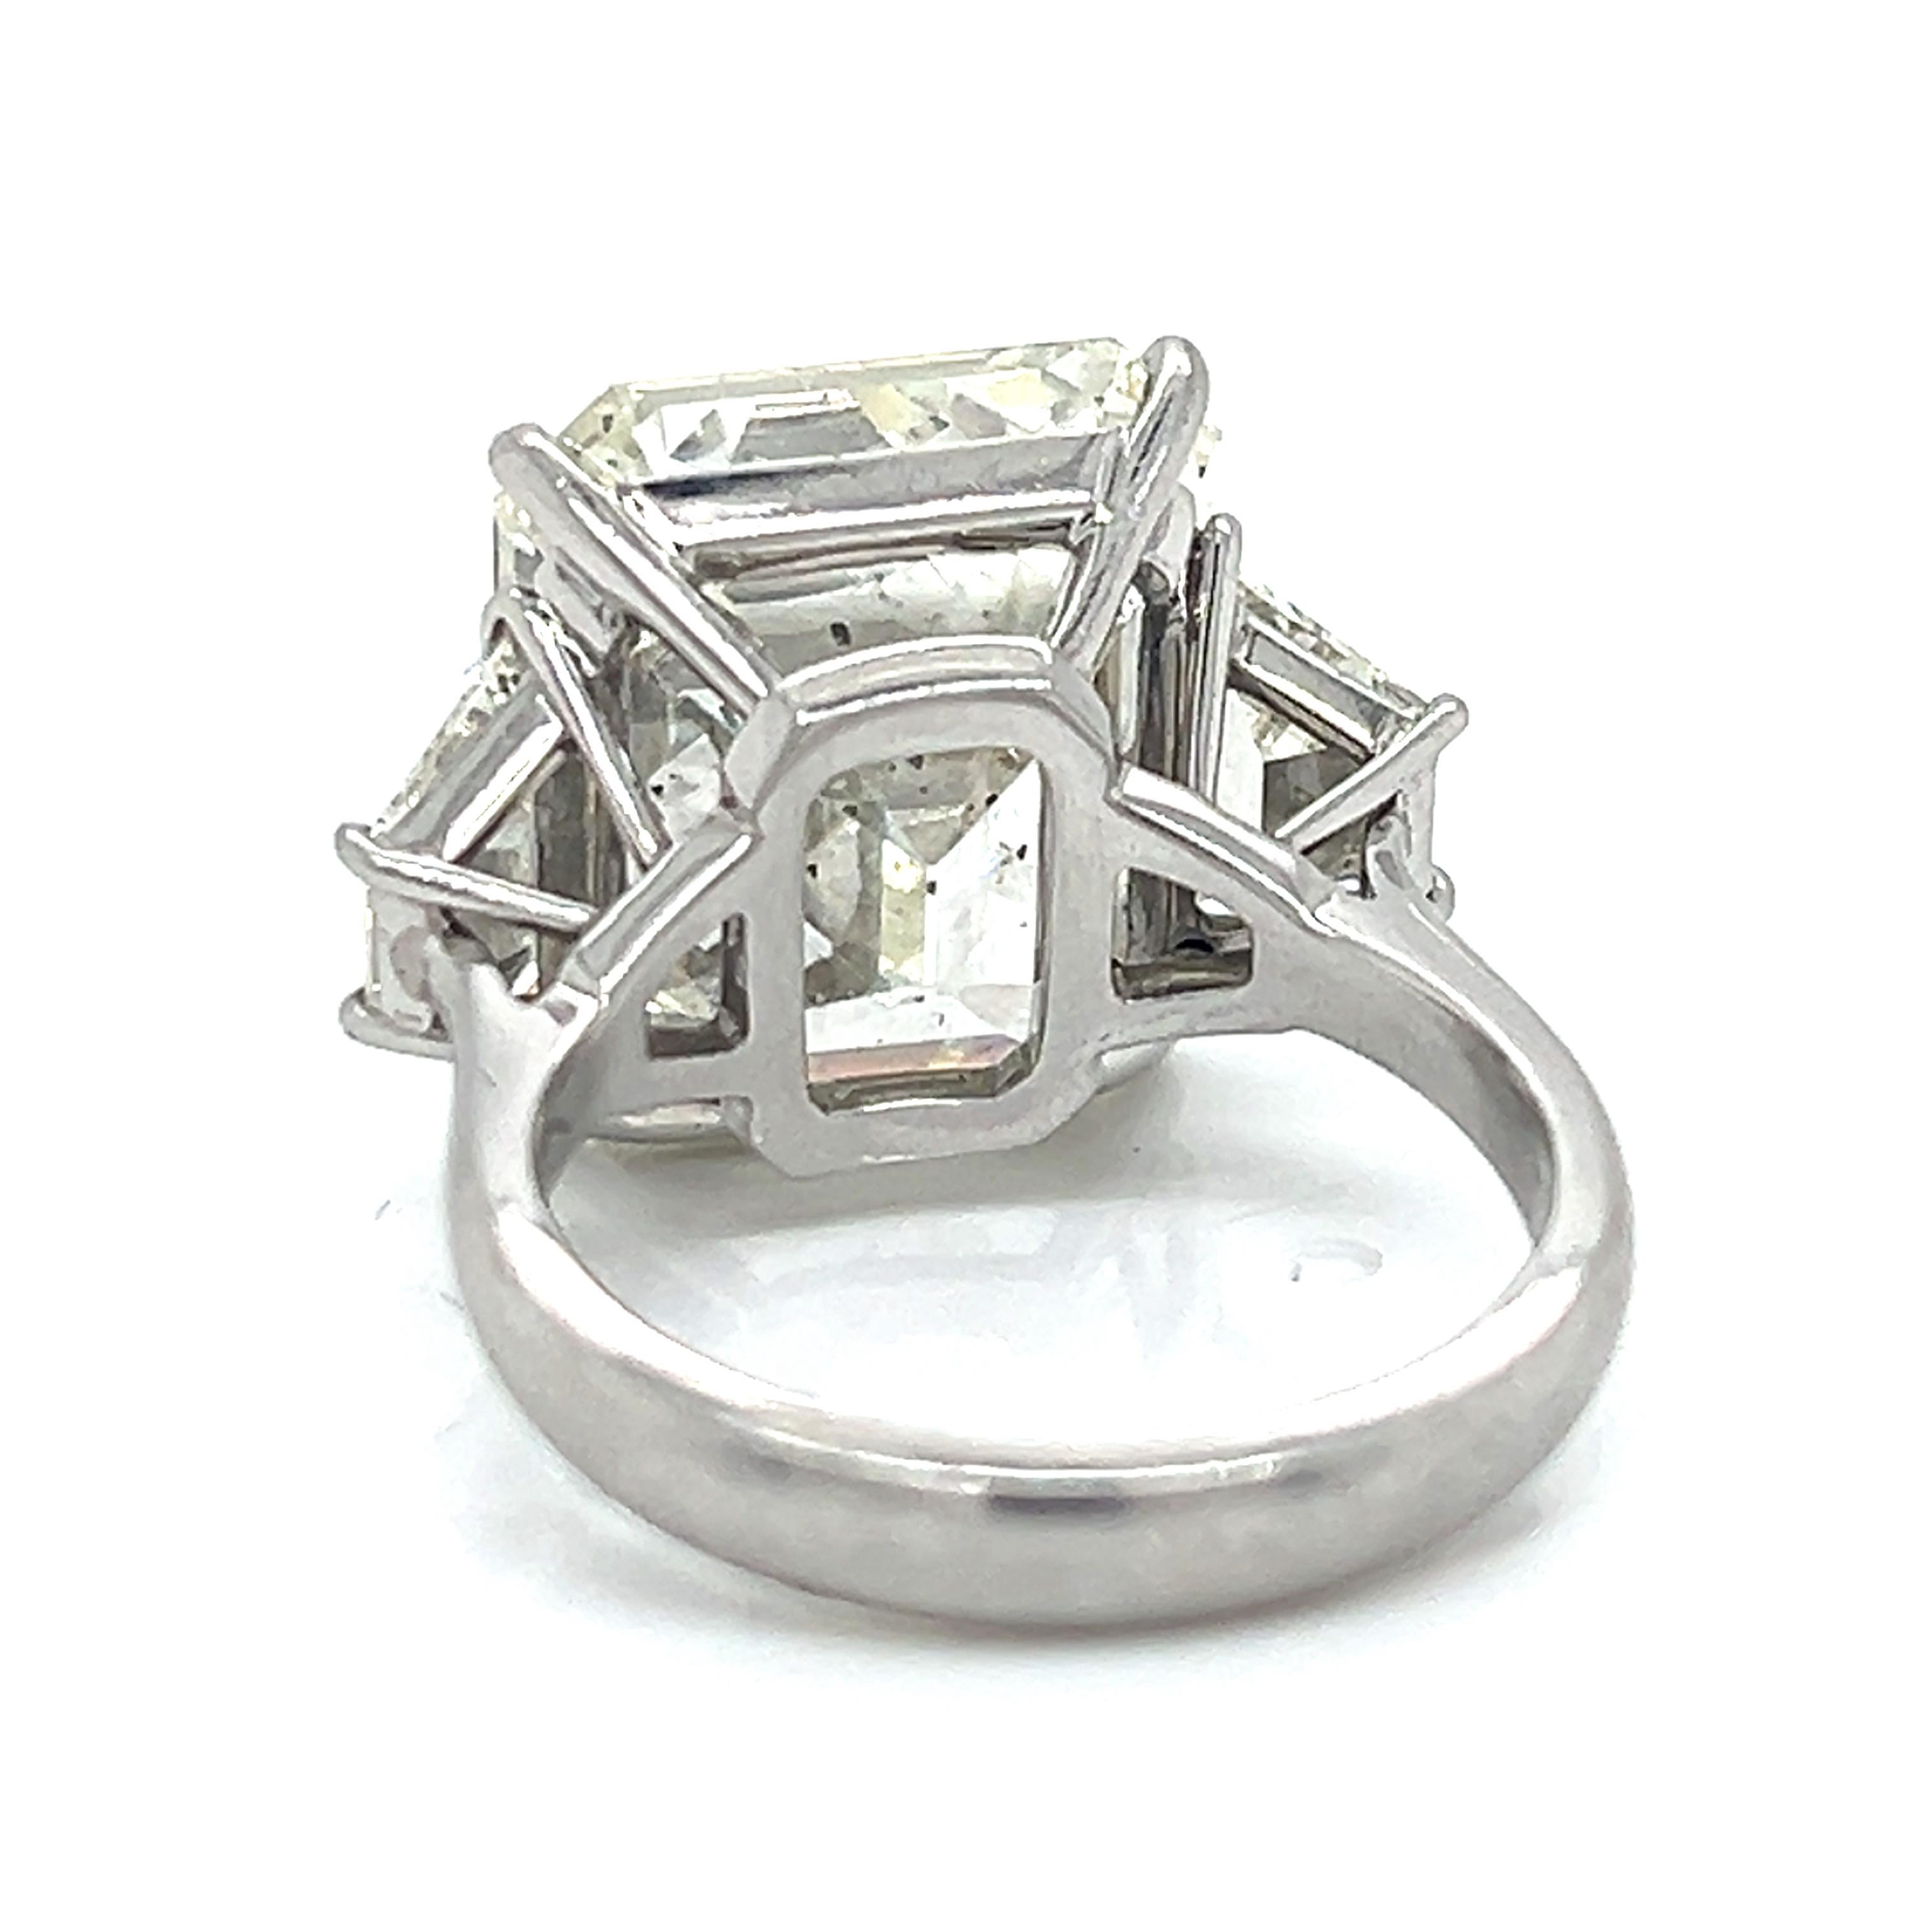 Contemporary Platinum GIA Certified 15.22 Ct. Diamond Ring For Sale